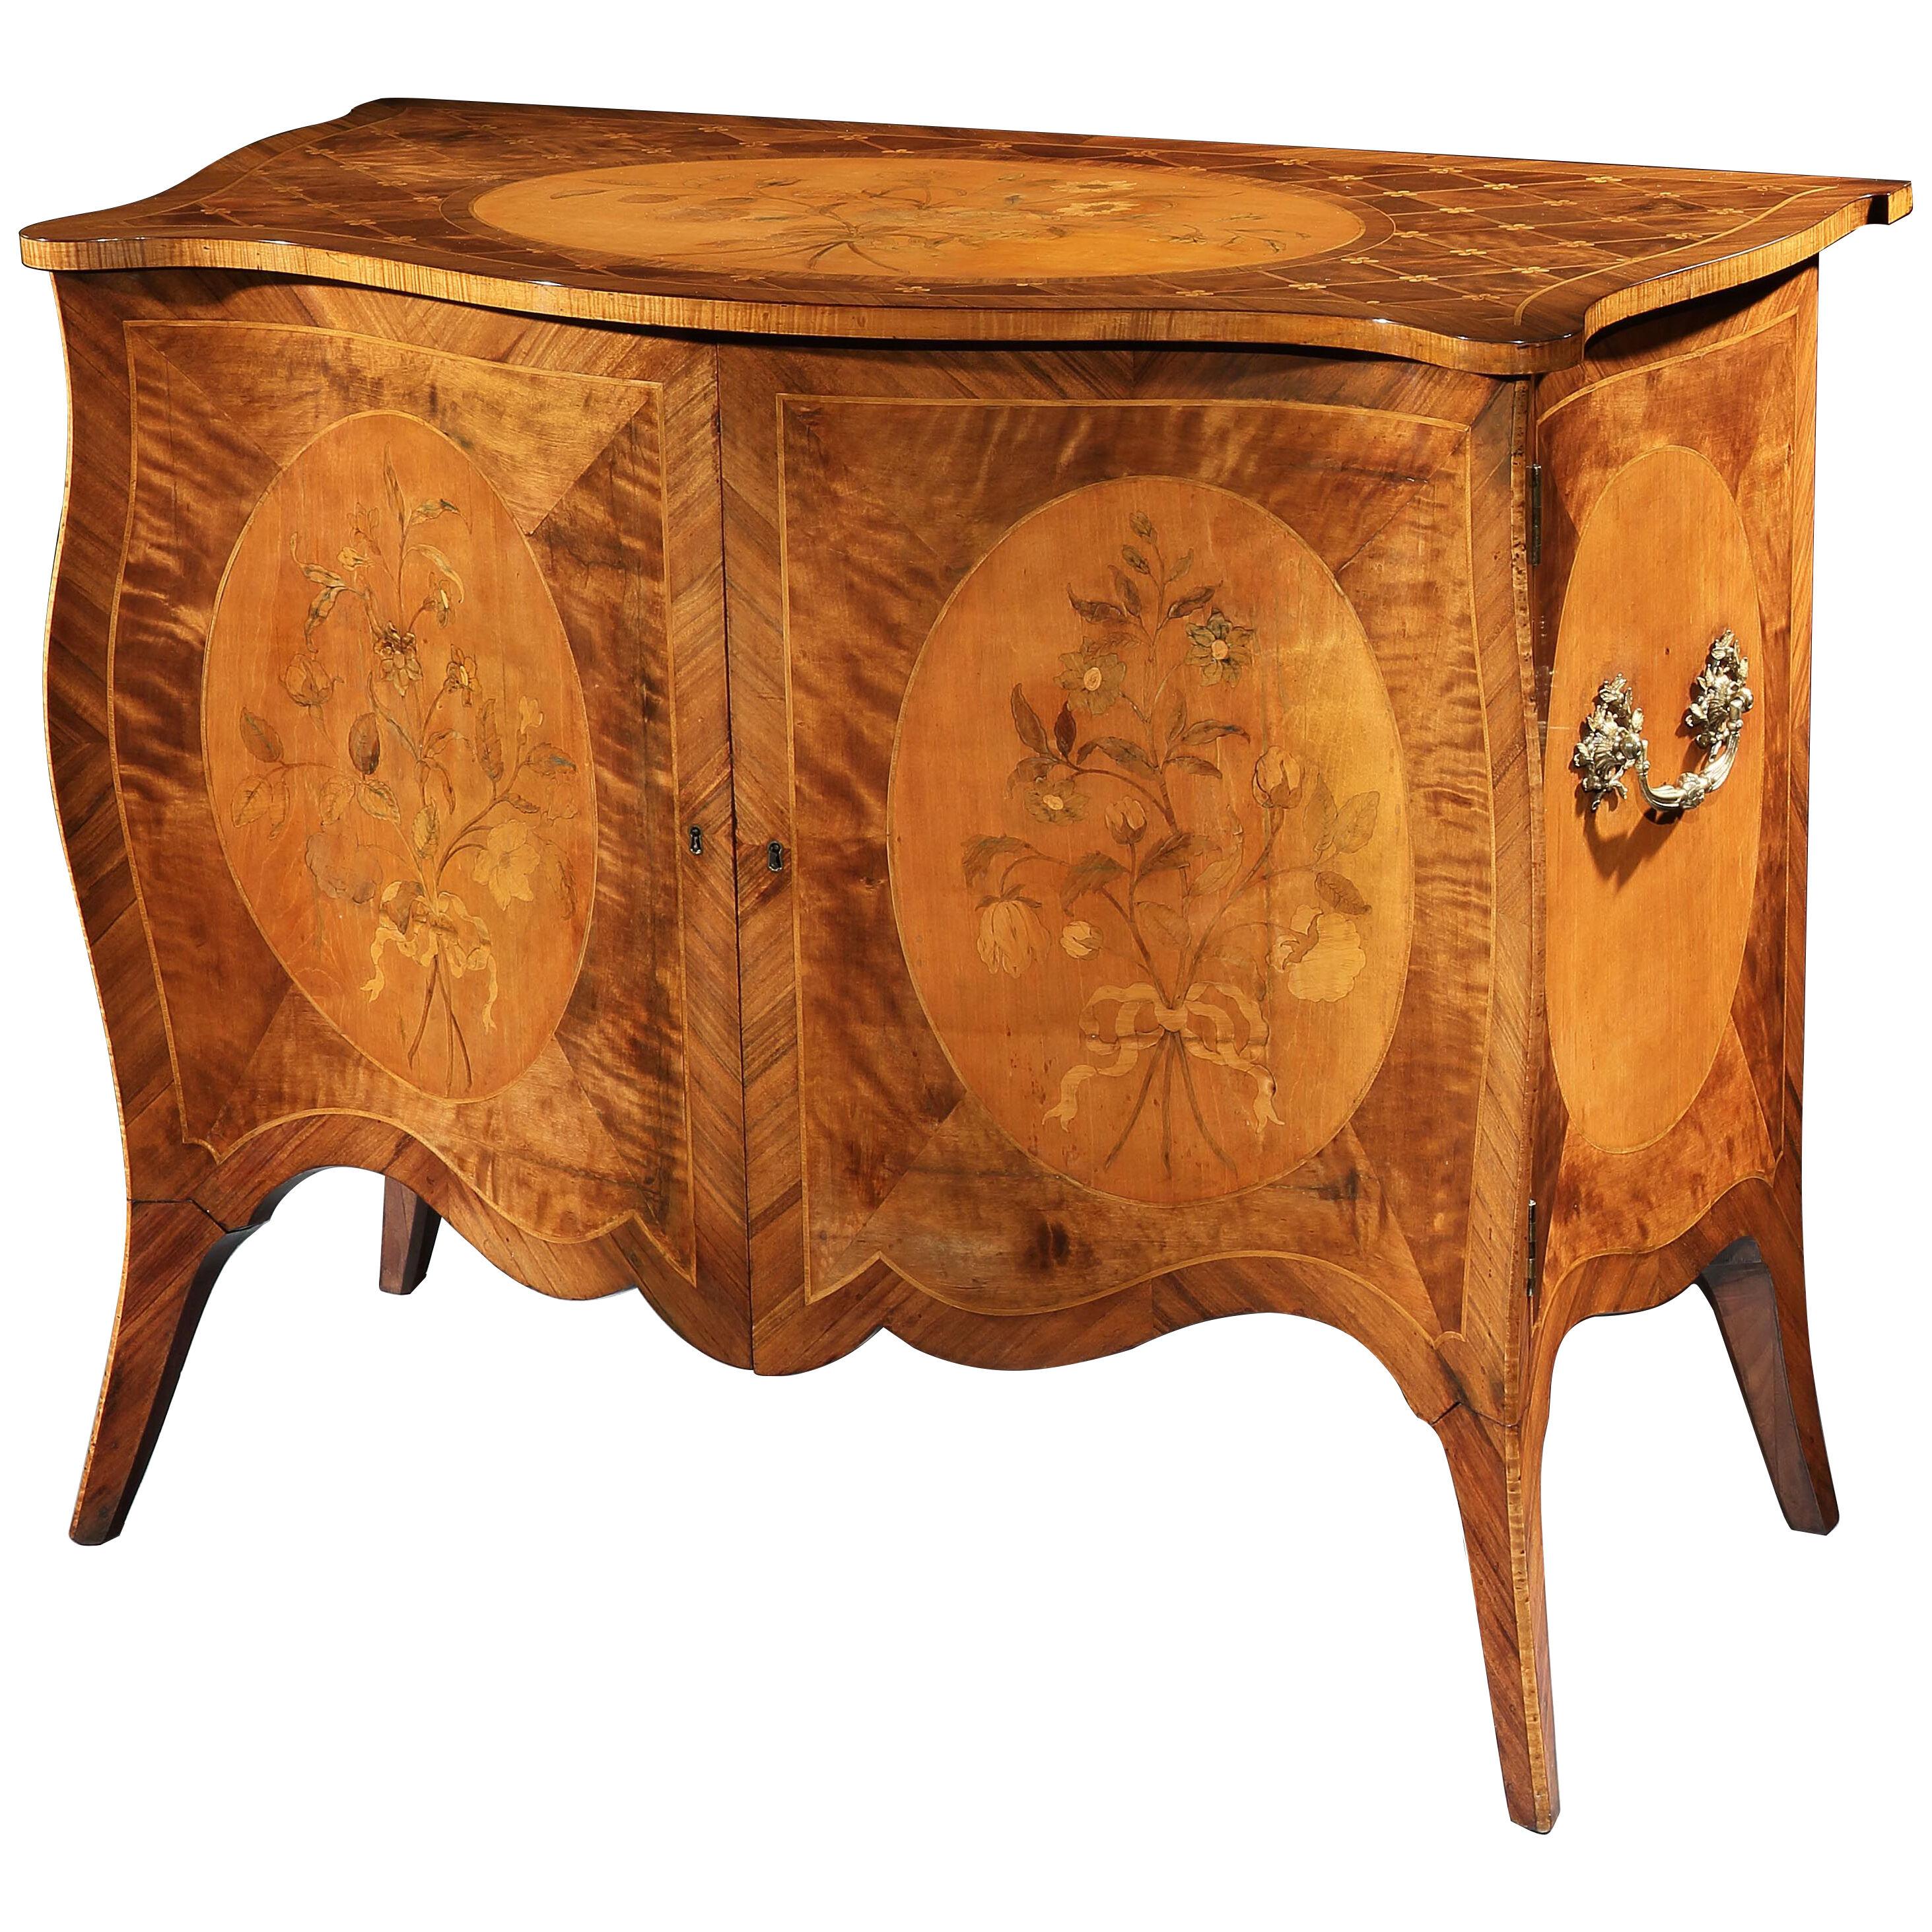 A GEORGE III SATINWOOD AND HAREWOOD COMMODE 